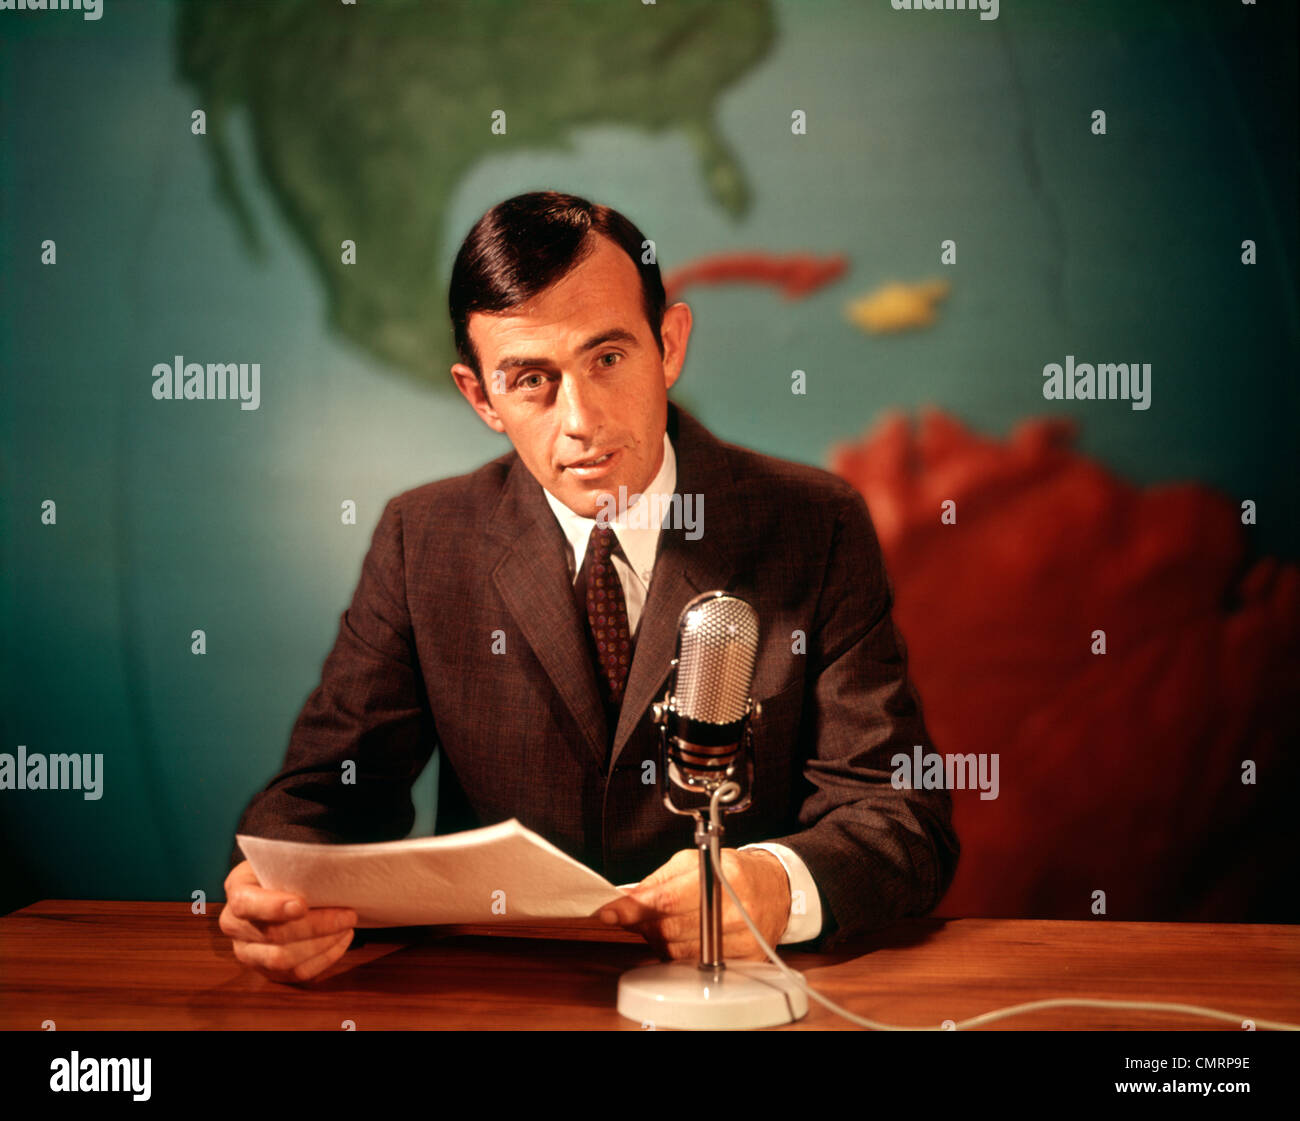 1960 1960s SERIOUS NEWS REPORTER READING NEWS INTO MICROPHONE WITH GLOBAL MAP BACKGROUND REPORT NEWSMAN MAN MEN RETRO Stock Photo